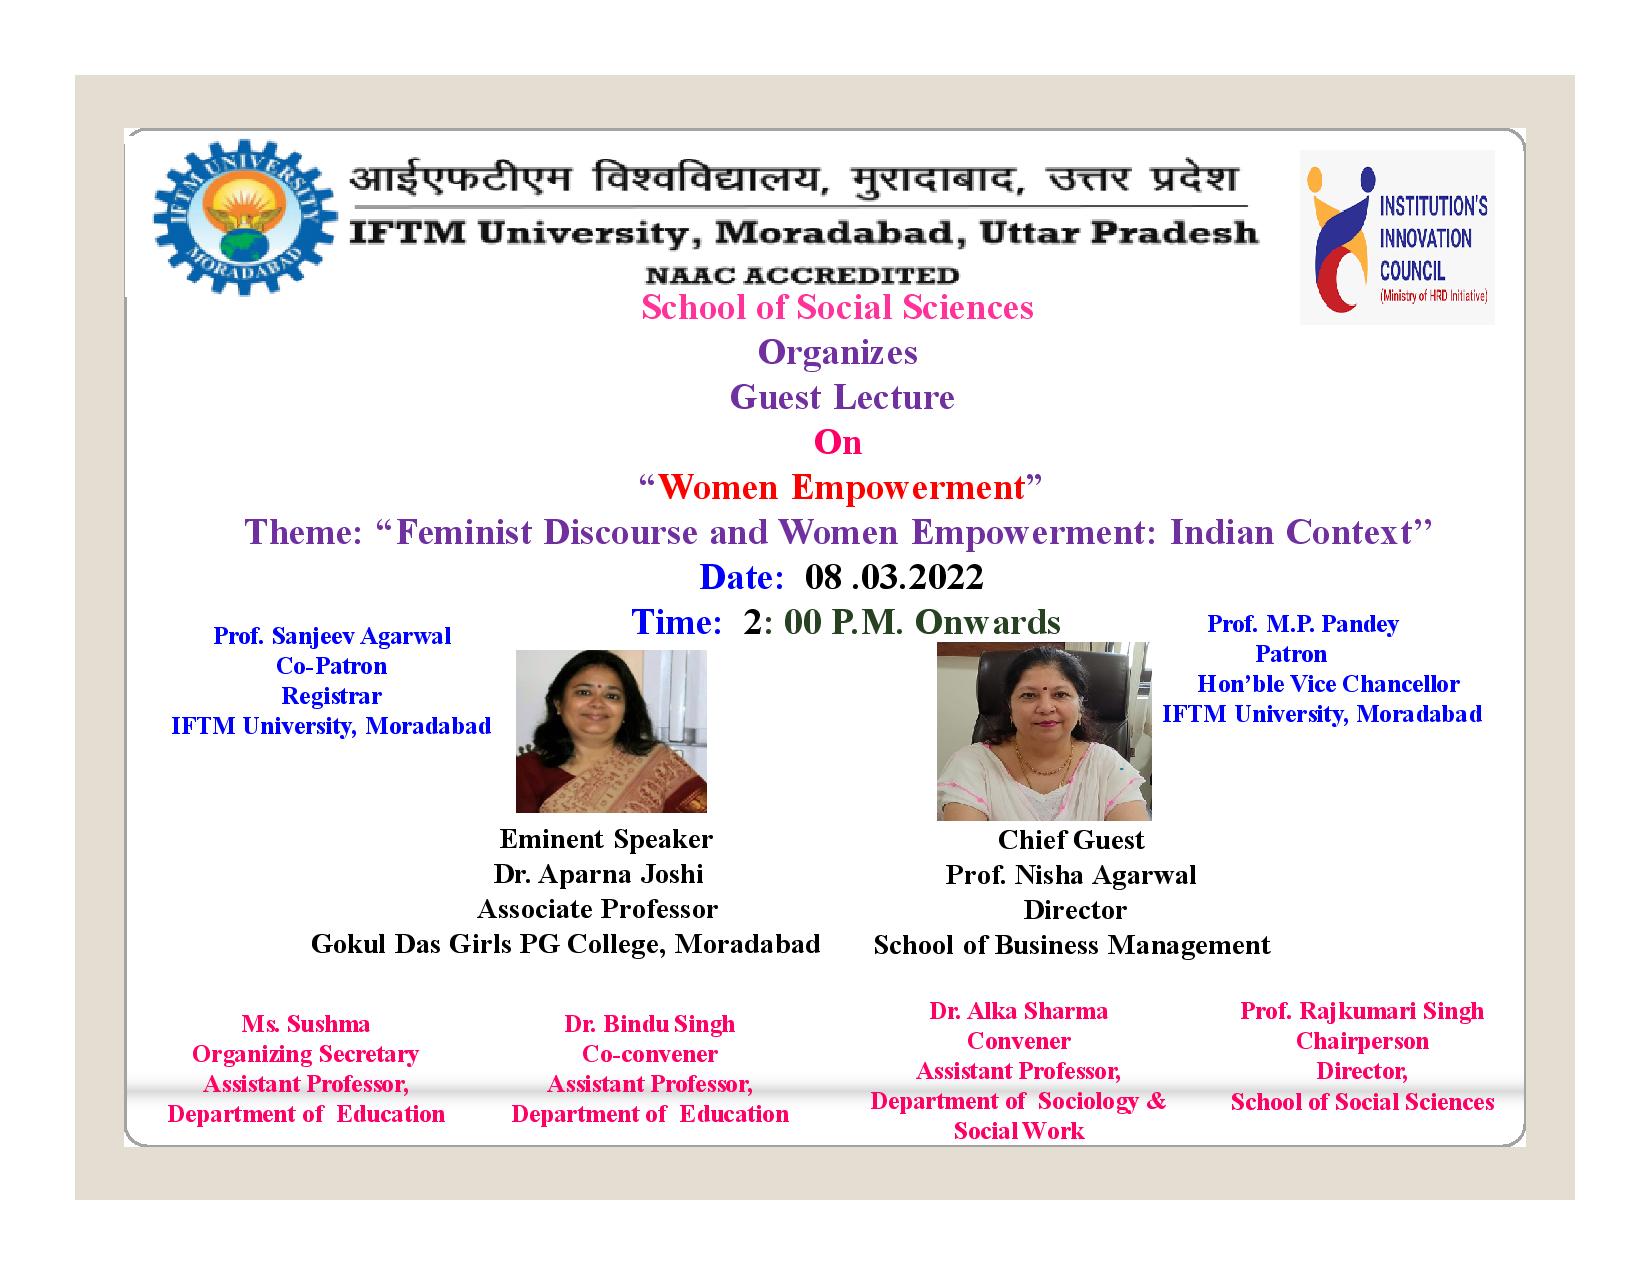 Guest Lecture On Women Empowerment, Theme: Feminist Discourse and Women Empowerment: Indian Context.